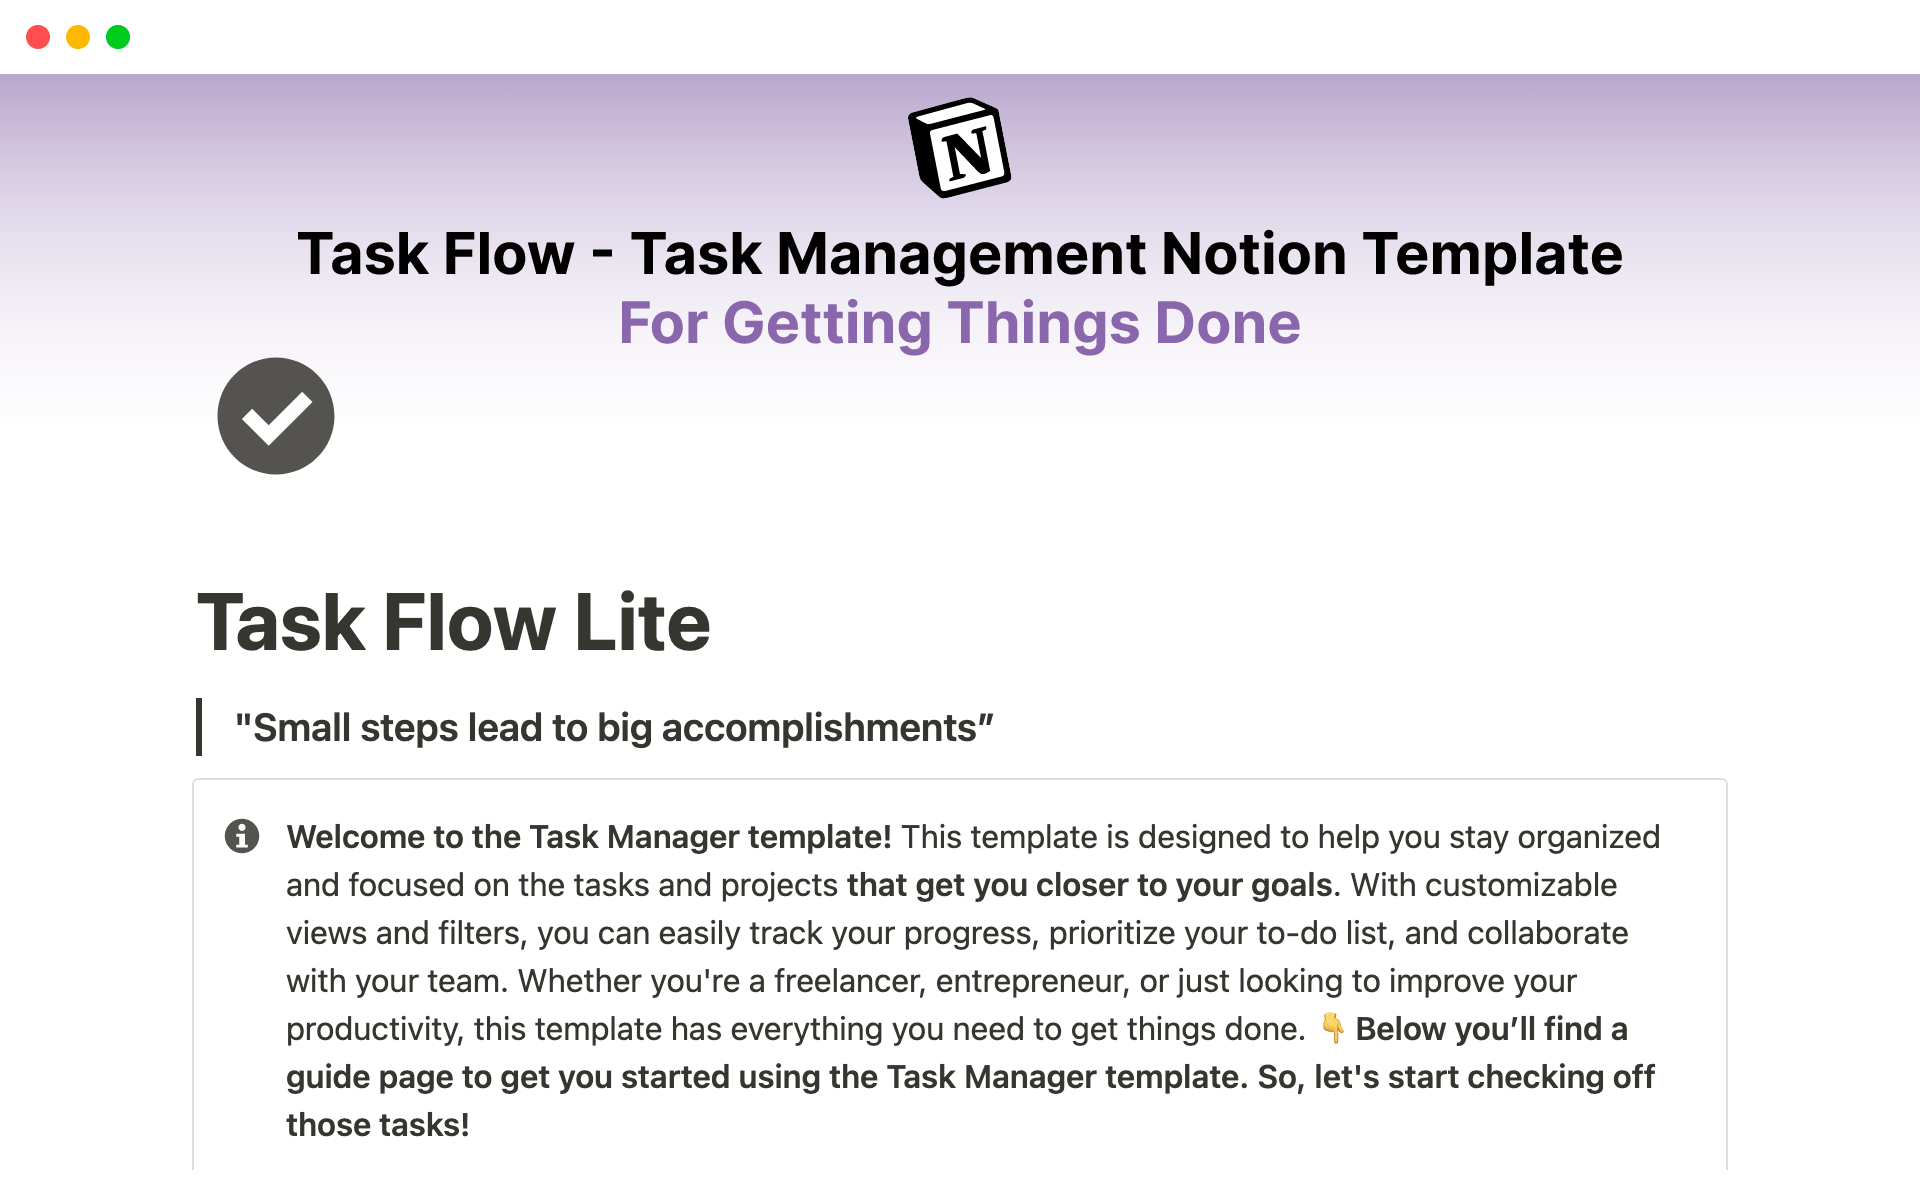 Task Flow Lite system allows it users to easily manage their tasks.